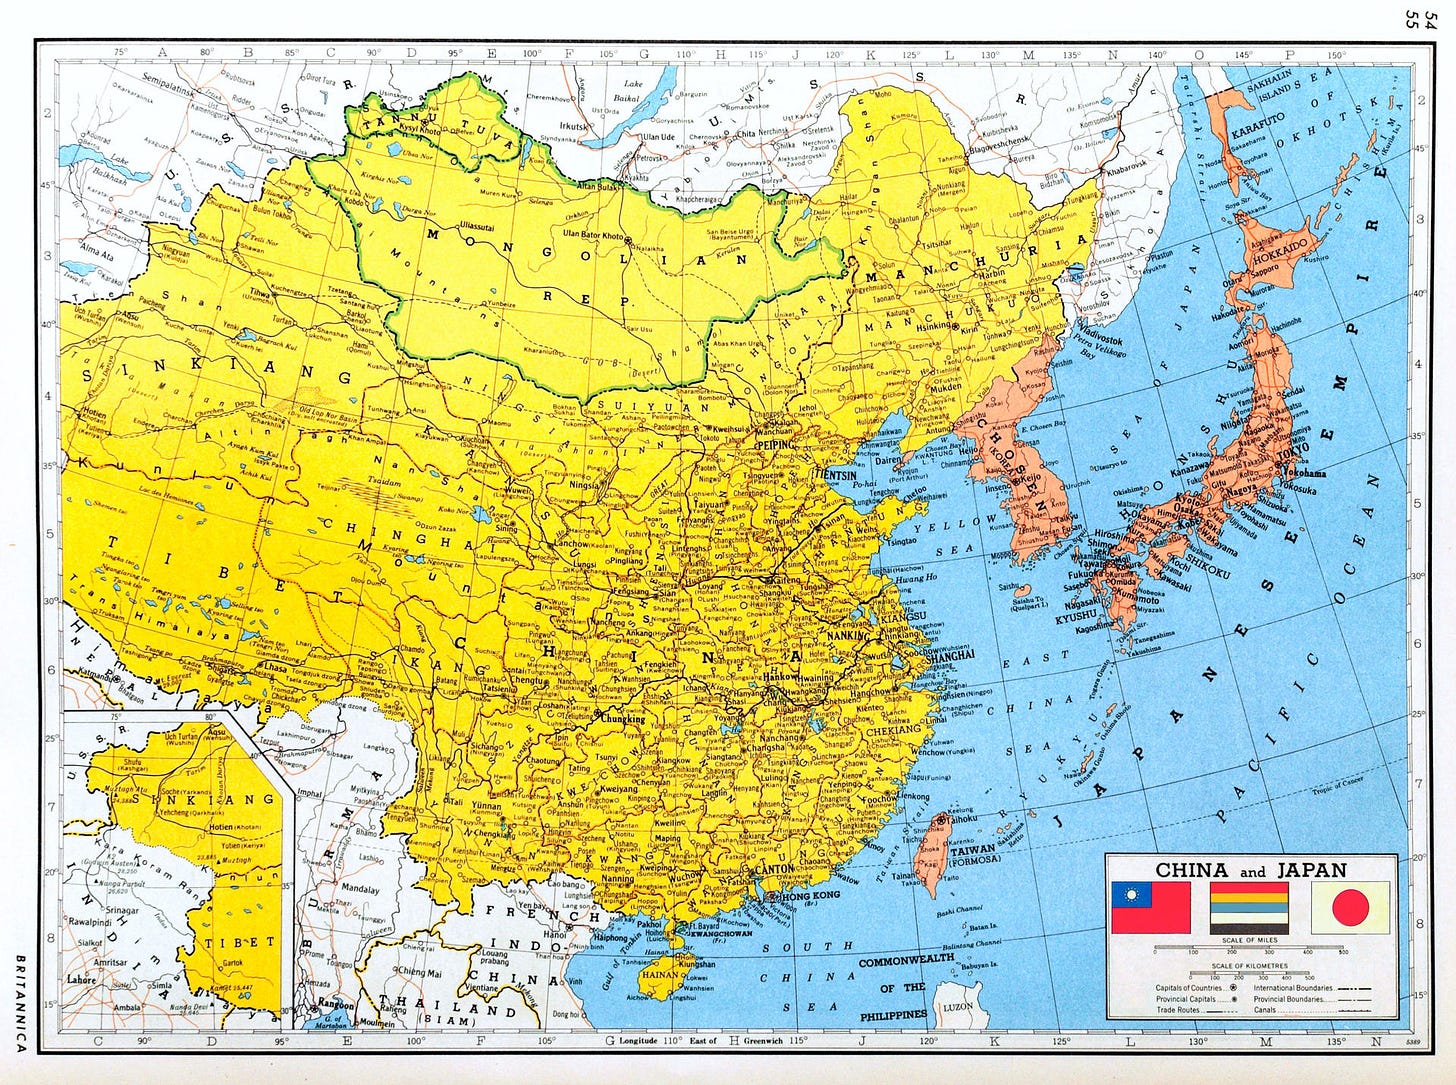 Detailed Map of China and Japan (Interwar) by Cameron-J-Nunley on DeviantArt